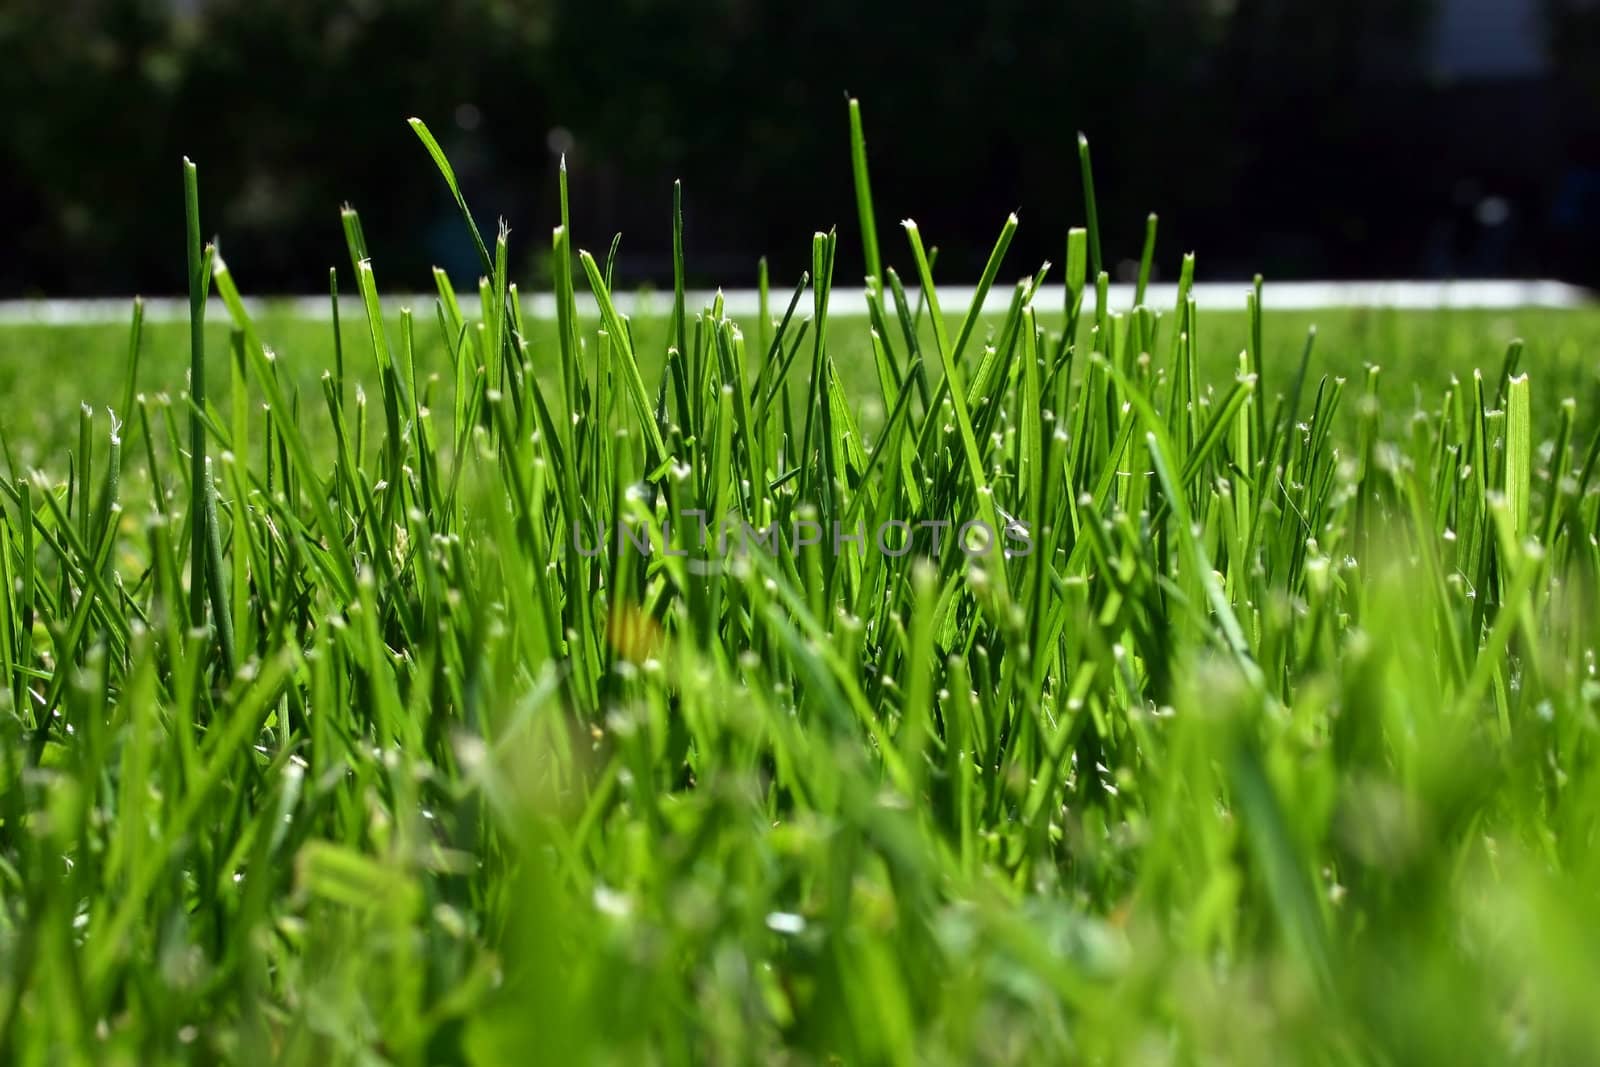 Rich green grass in my front yard